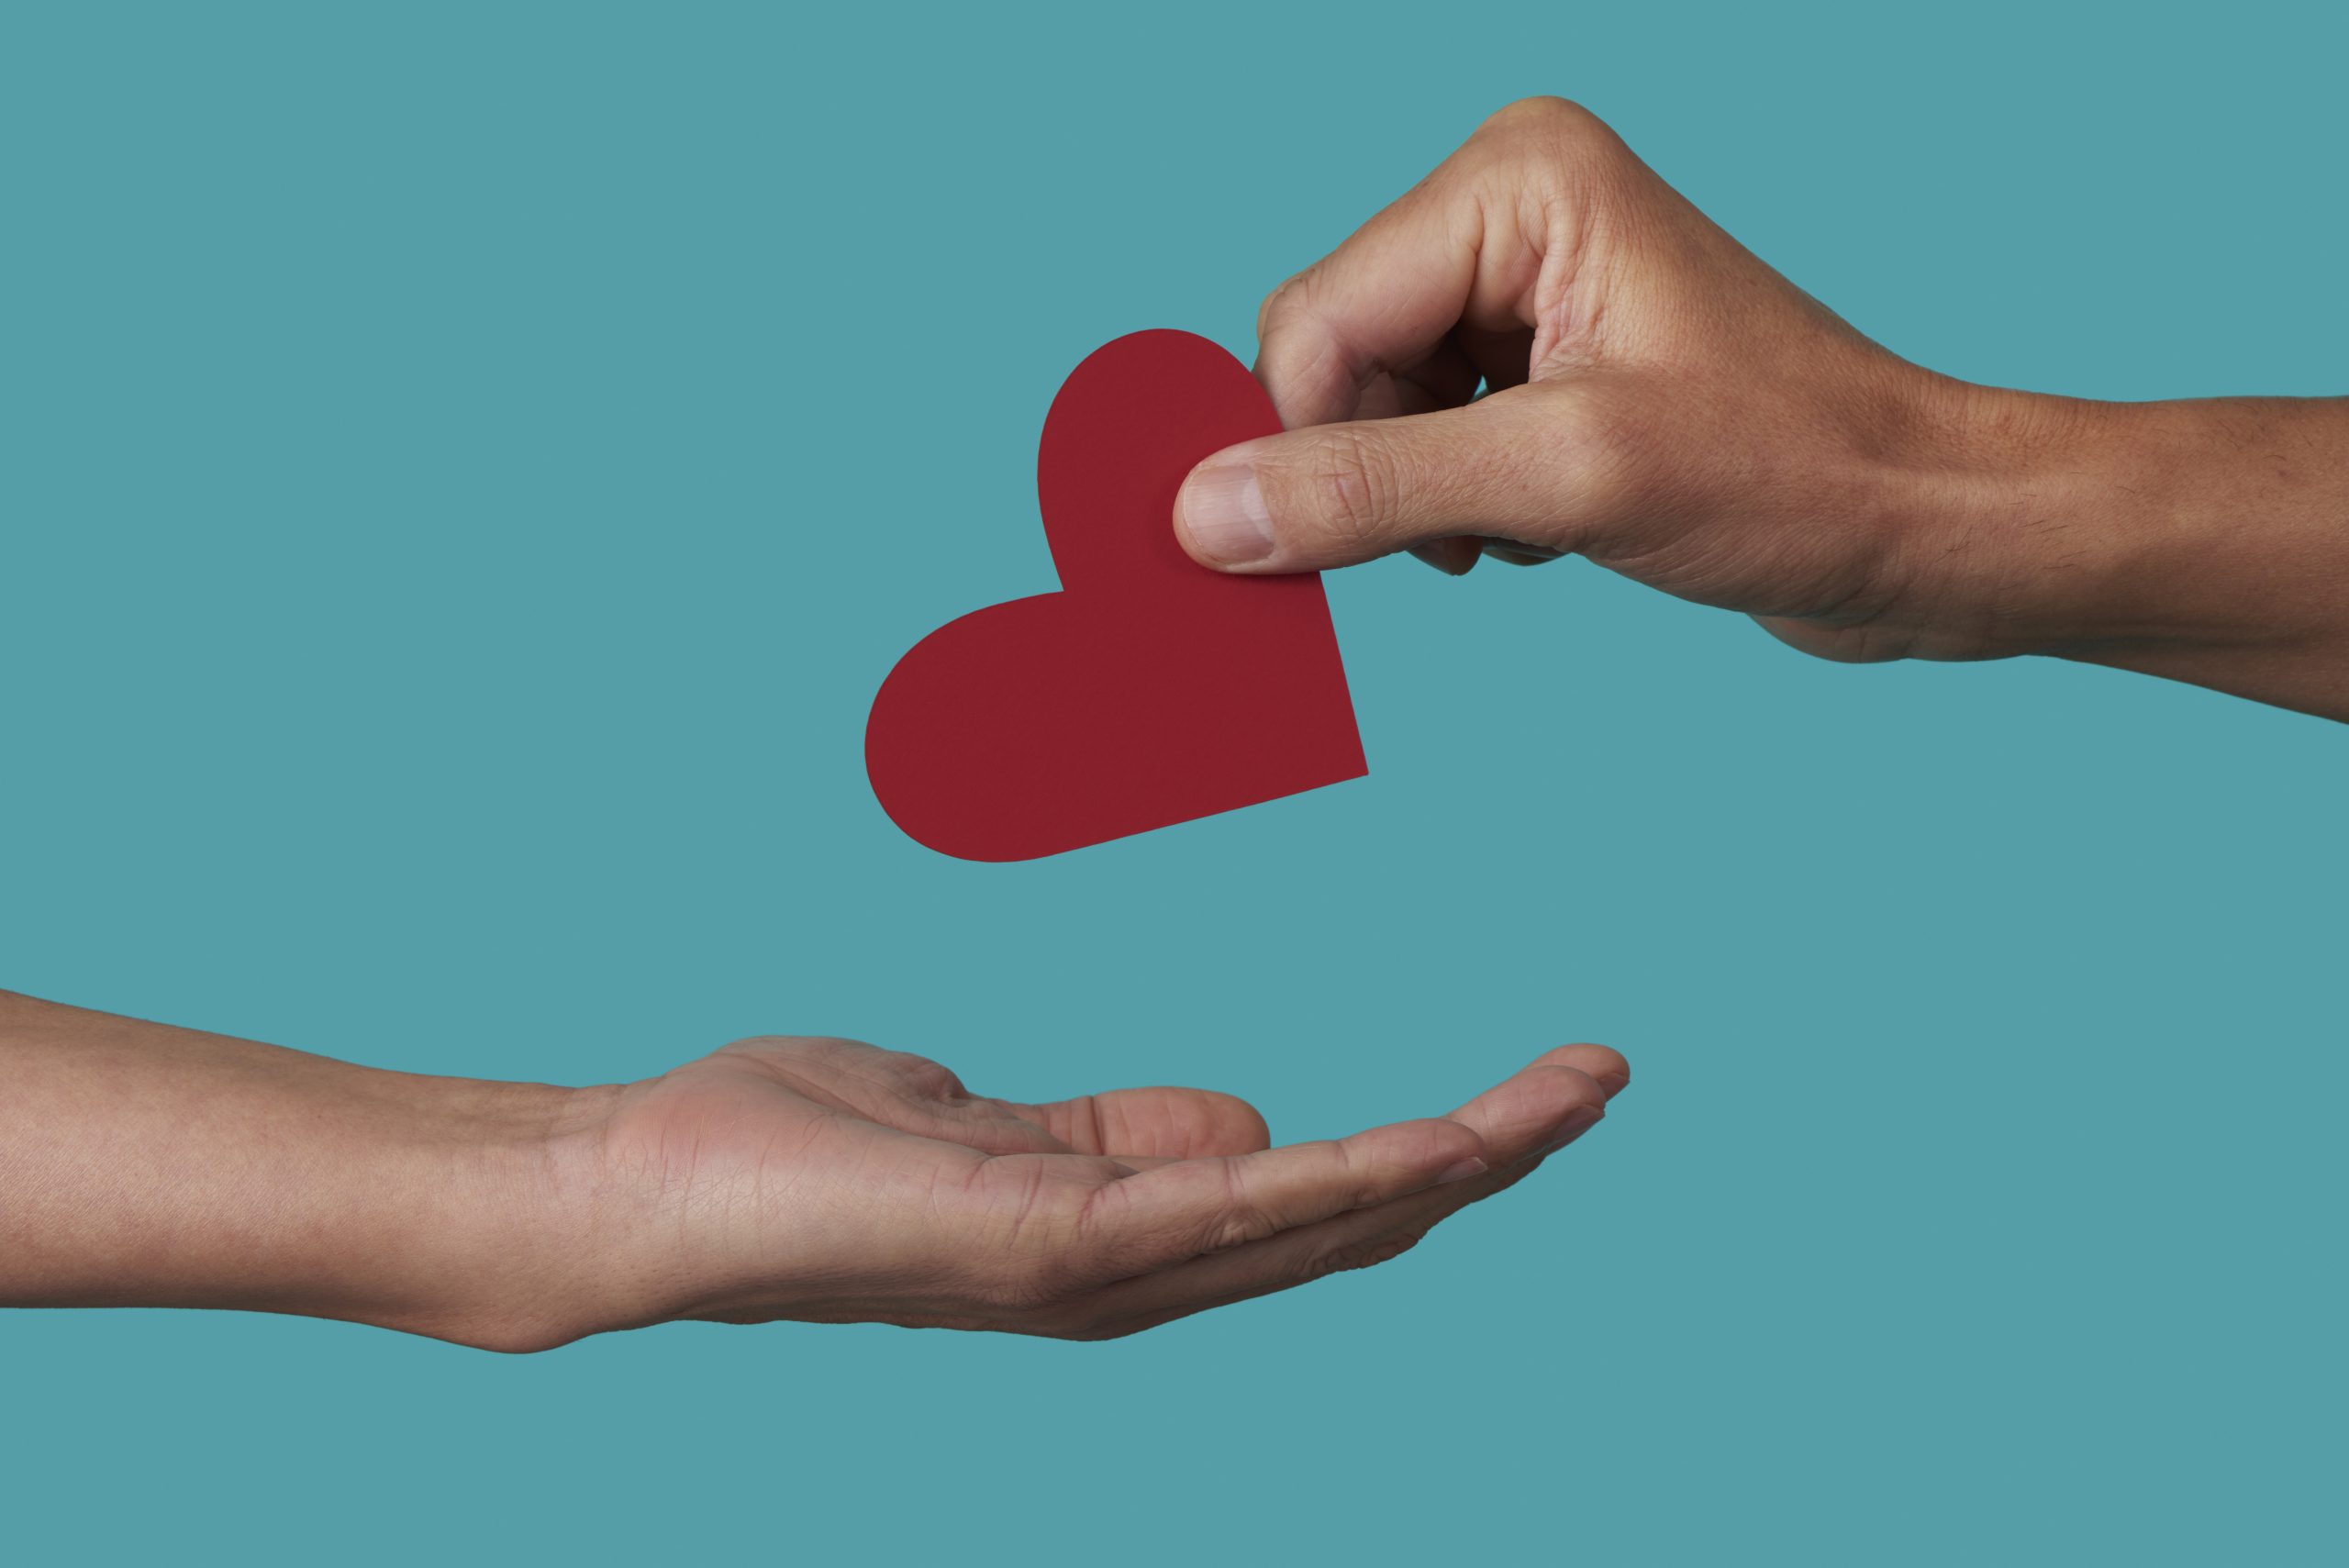 Hand placing a cut-out red heart into another person's open palm.